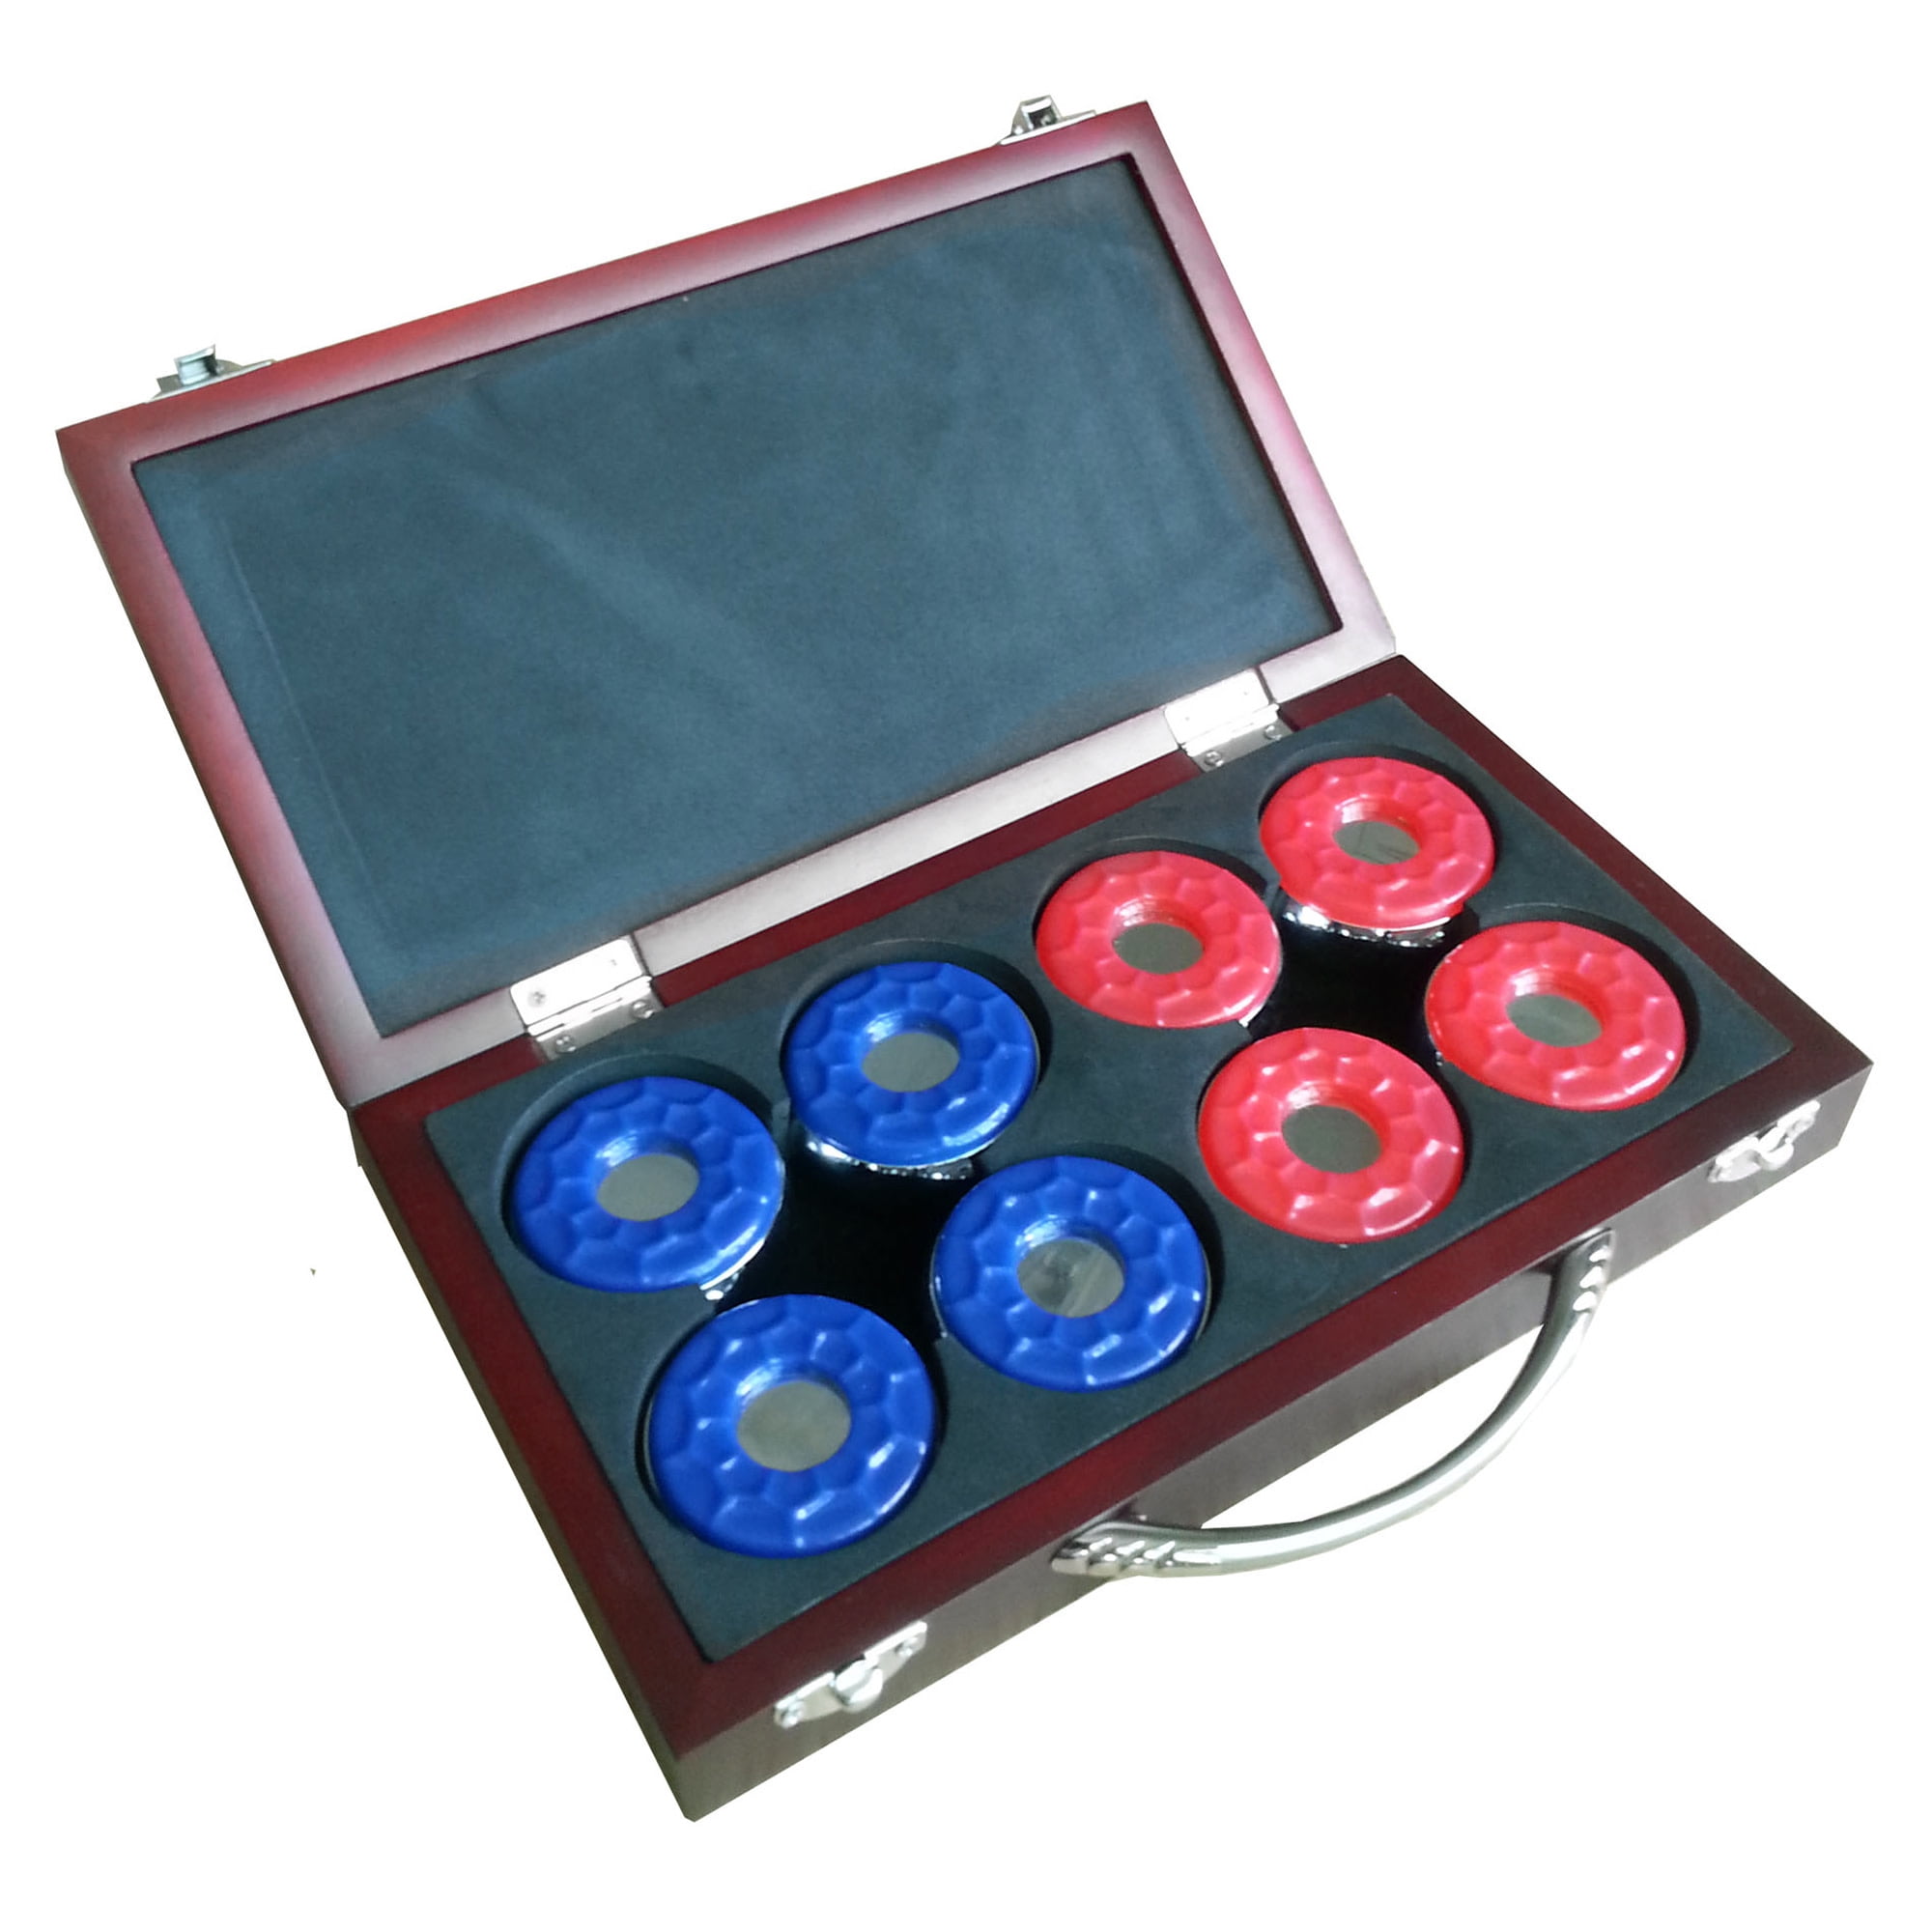 58mm/2.3 Katie Set of 8 Mini Table Shuffleboard Pucks Suitable for Travel Bar Family School Training